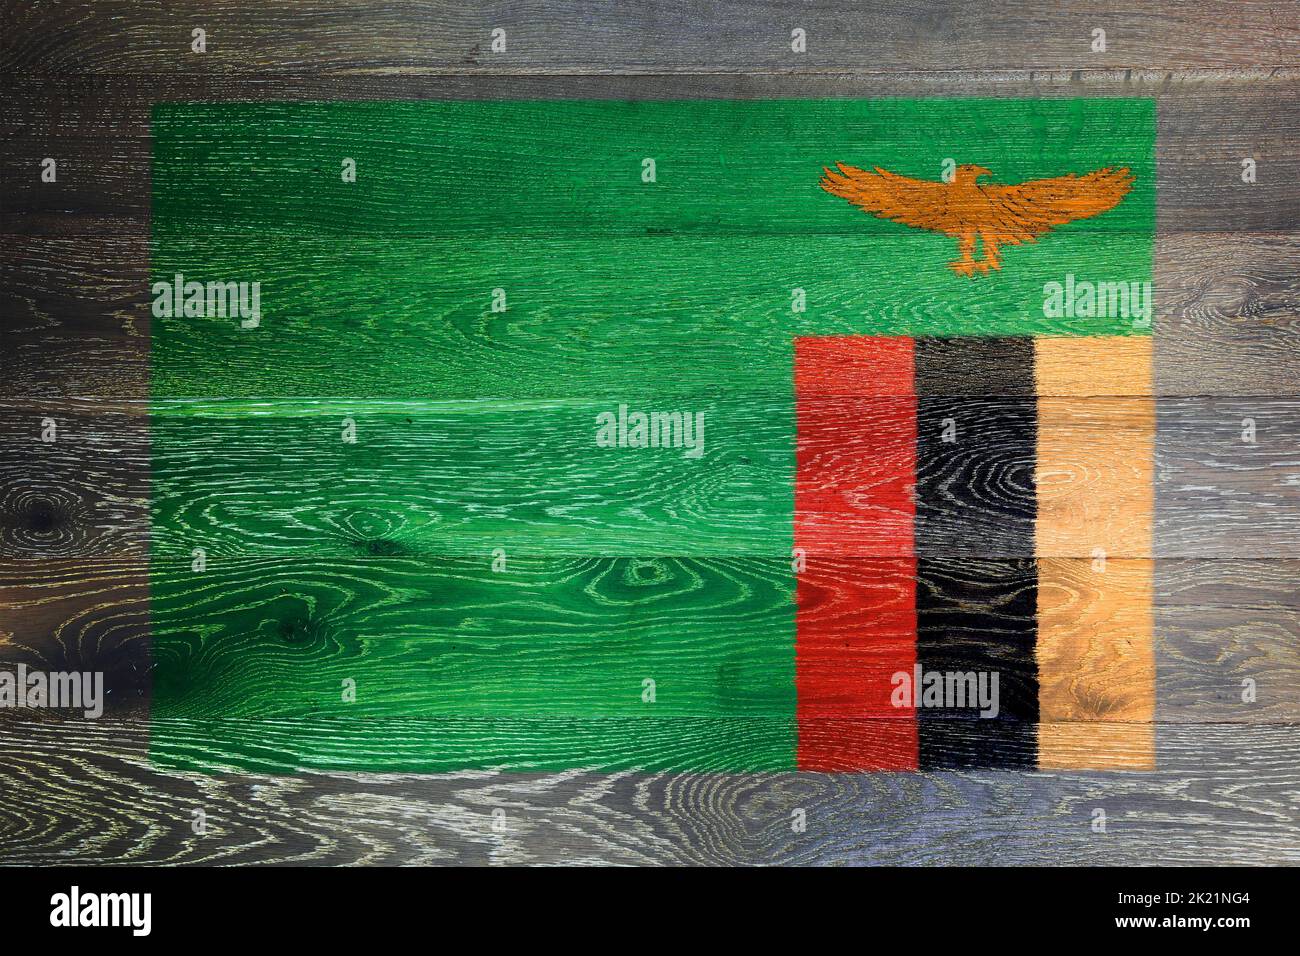 A Zambia flag on rustic old wood surface background Stock Photo